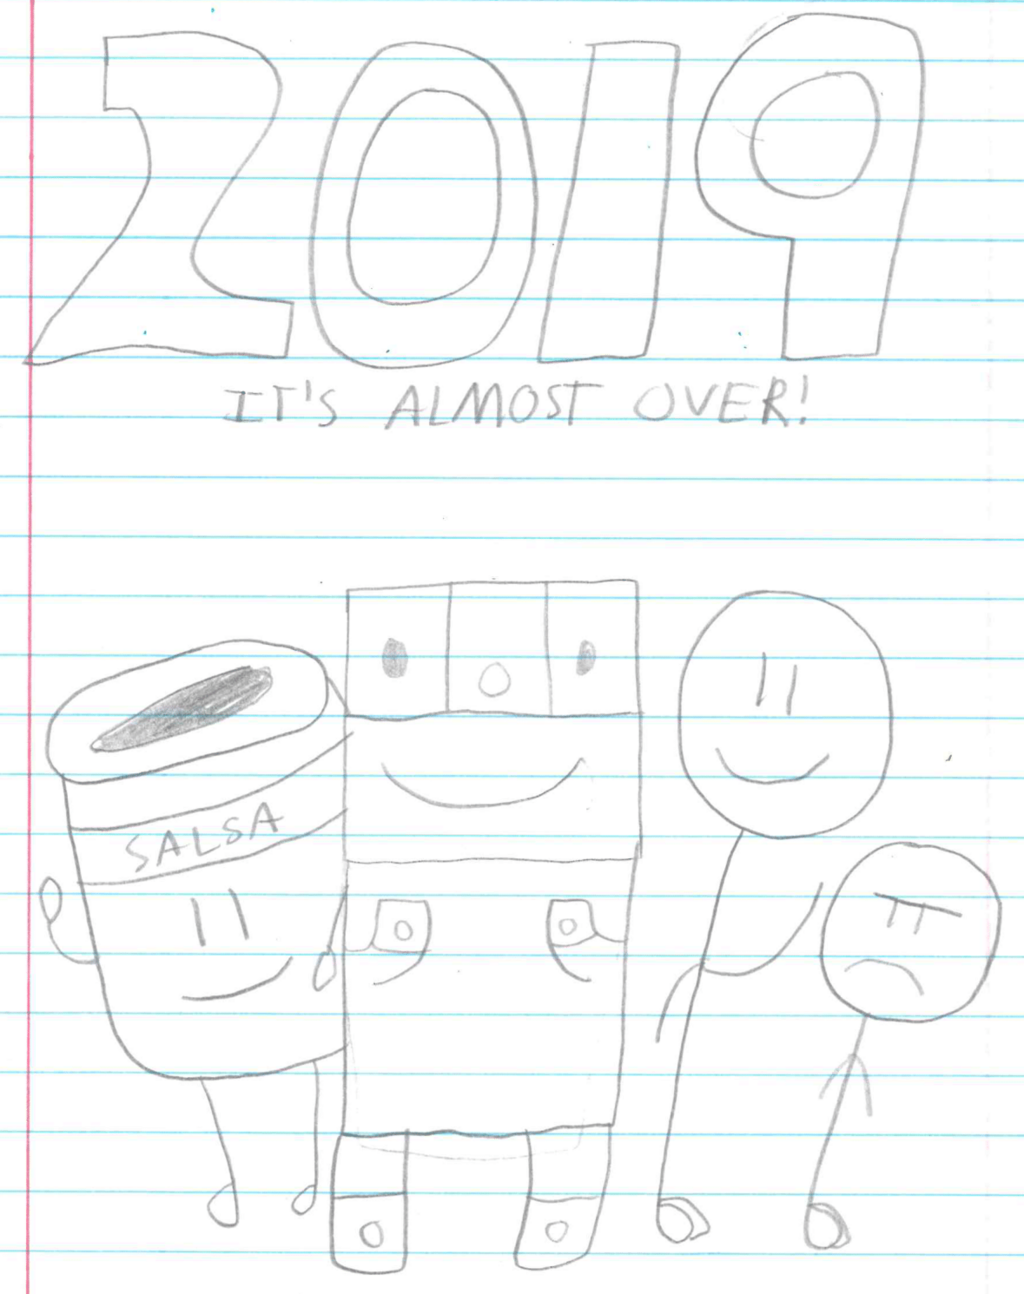 (OLD) 2019 is almost over!